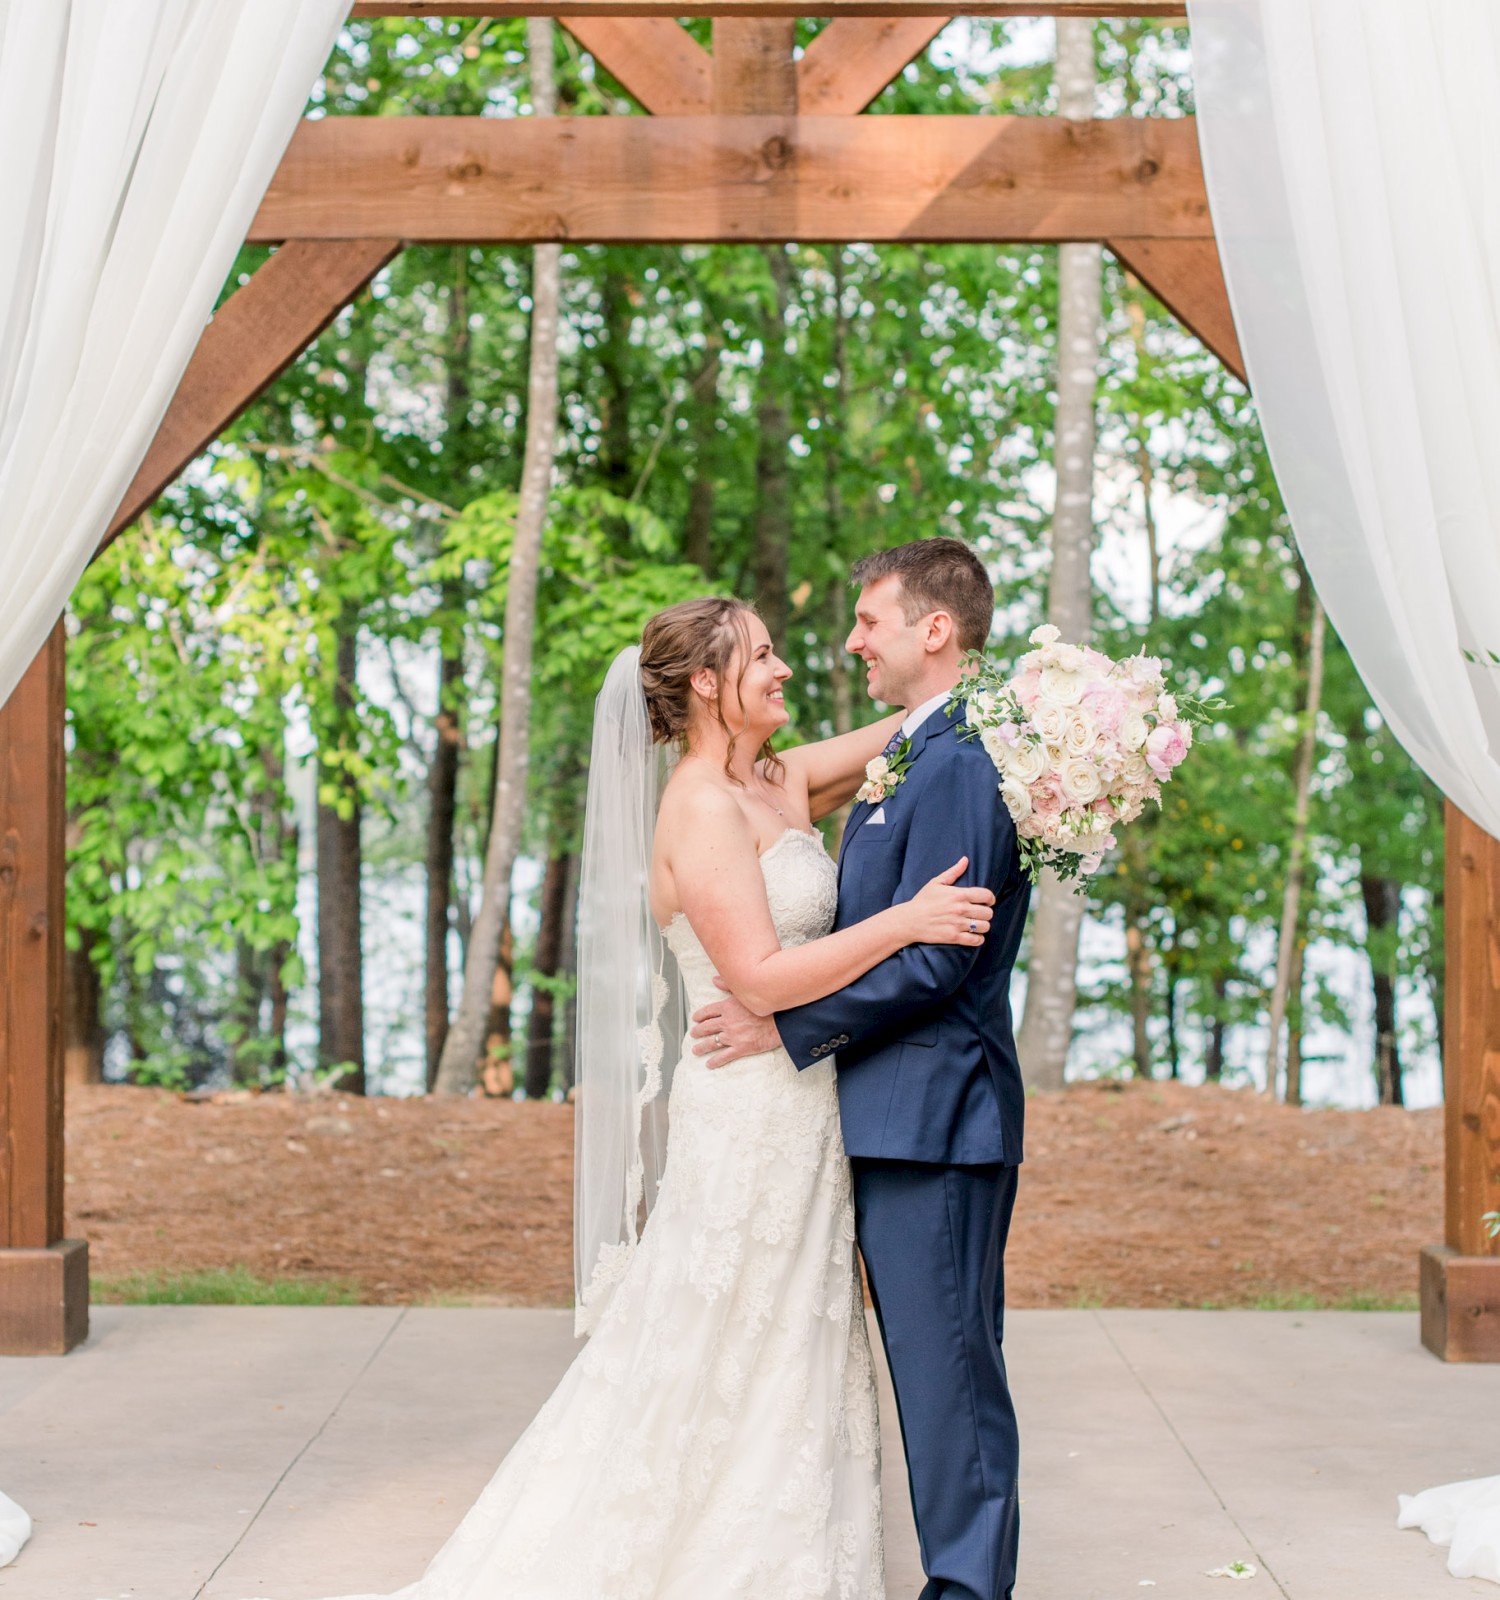 A bride and groom are embracing under a wooden arch with white drapes in an outdoor setting, likely during their wedding ceremony.